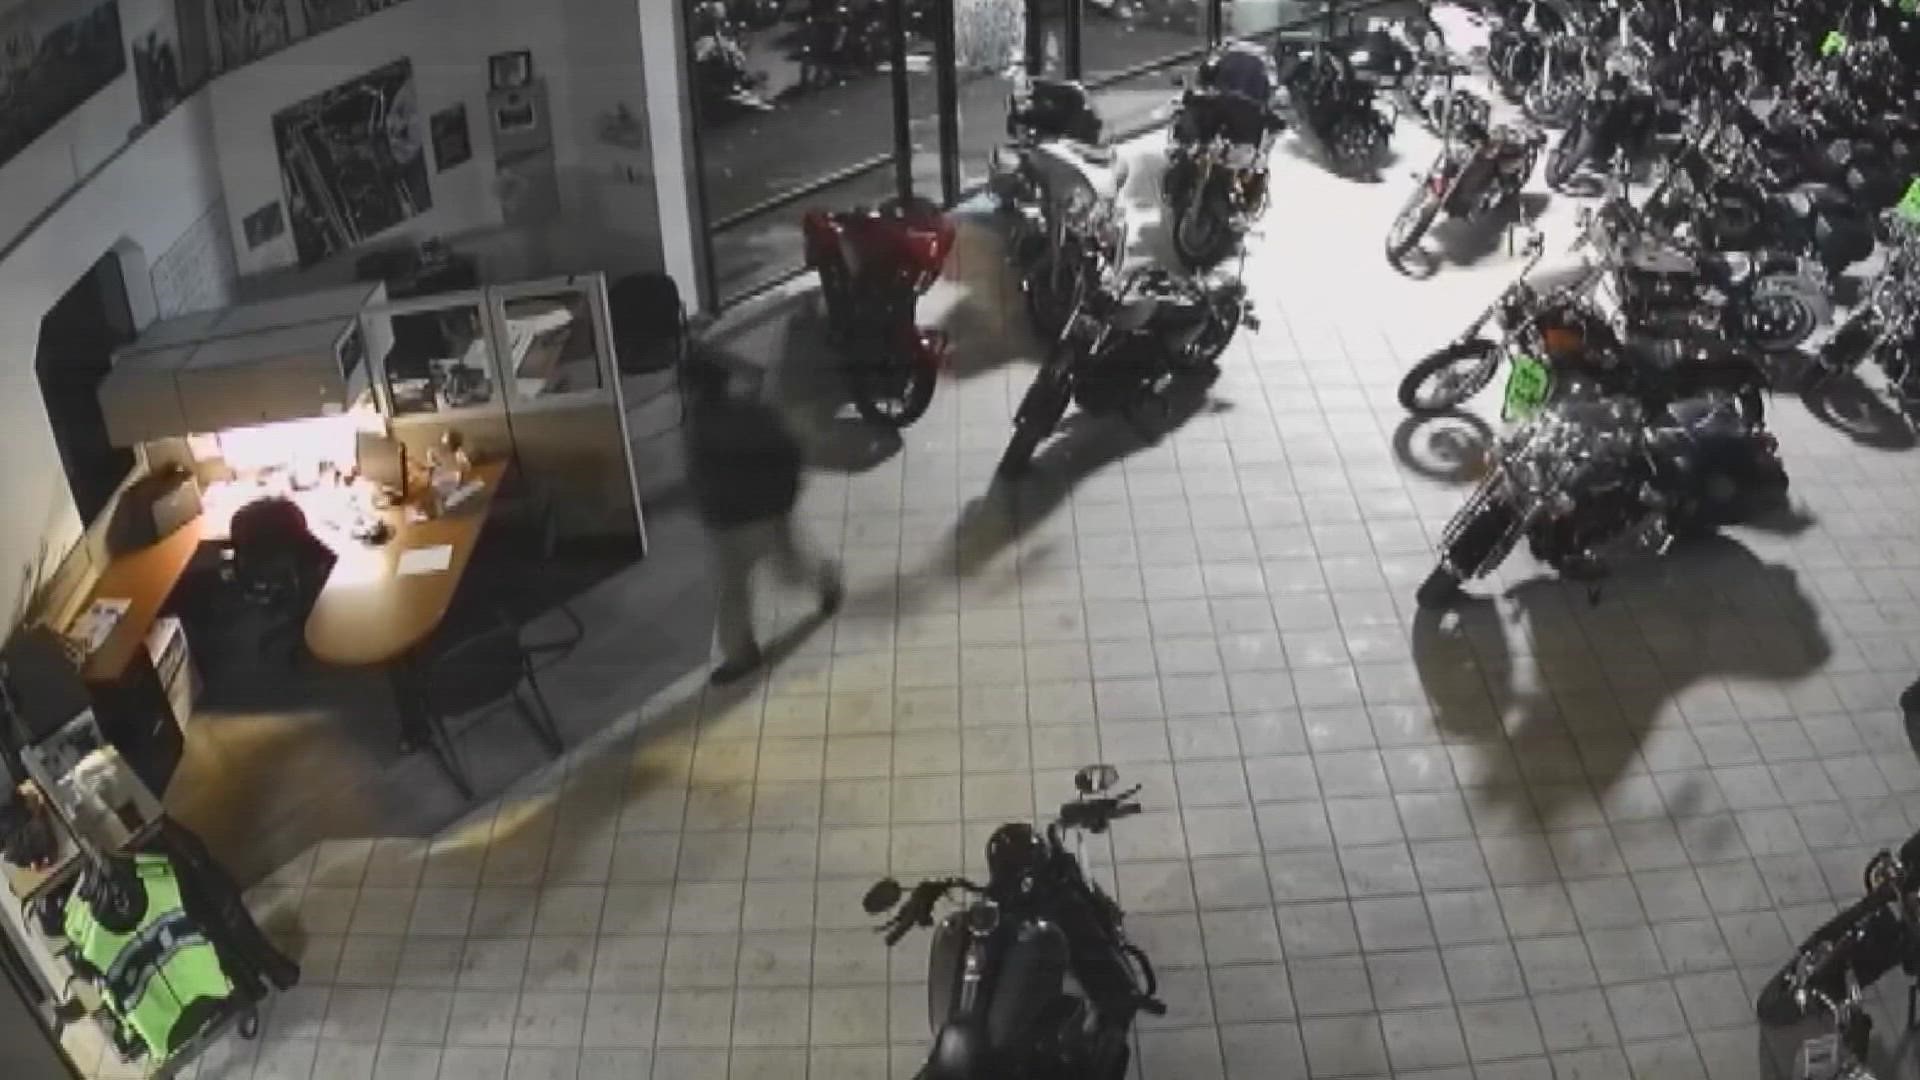 Police in Fife arrested a man who had repeatedly broken into a Harley-Davidson dealer on East Pacific Highway